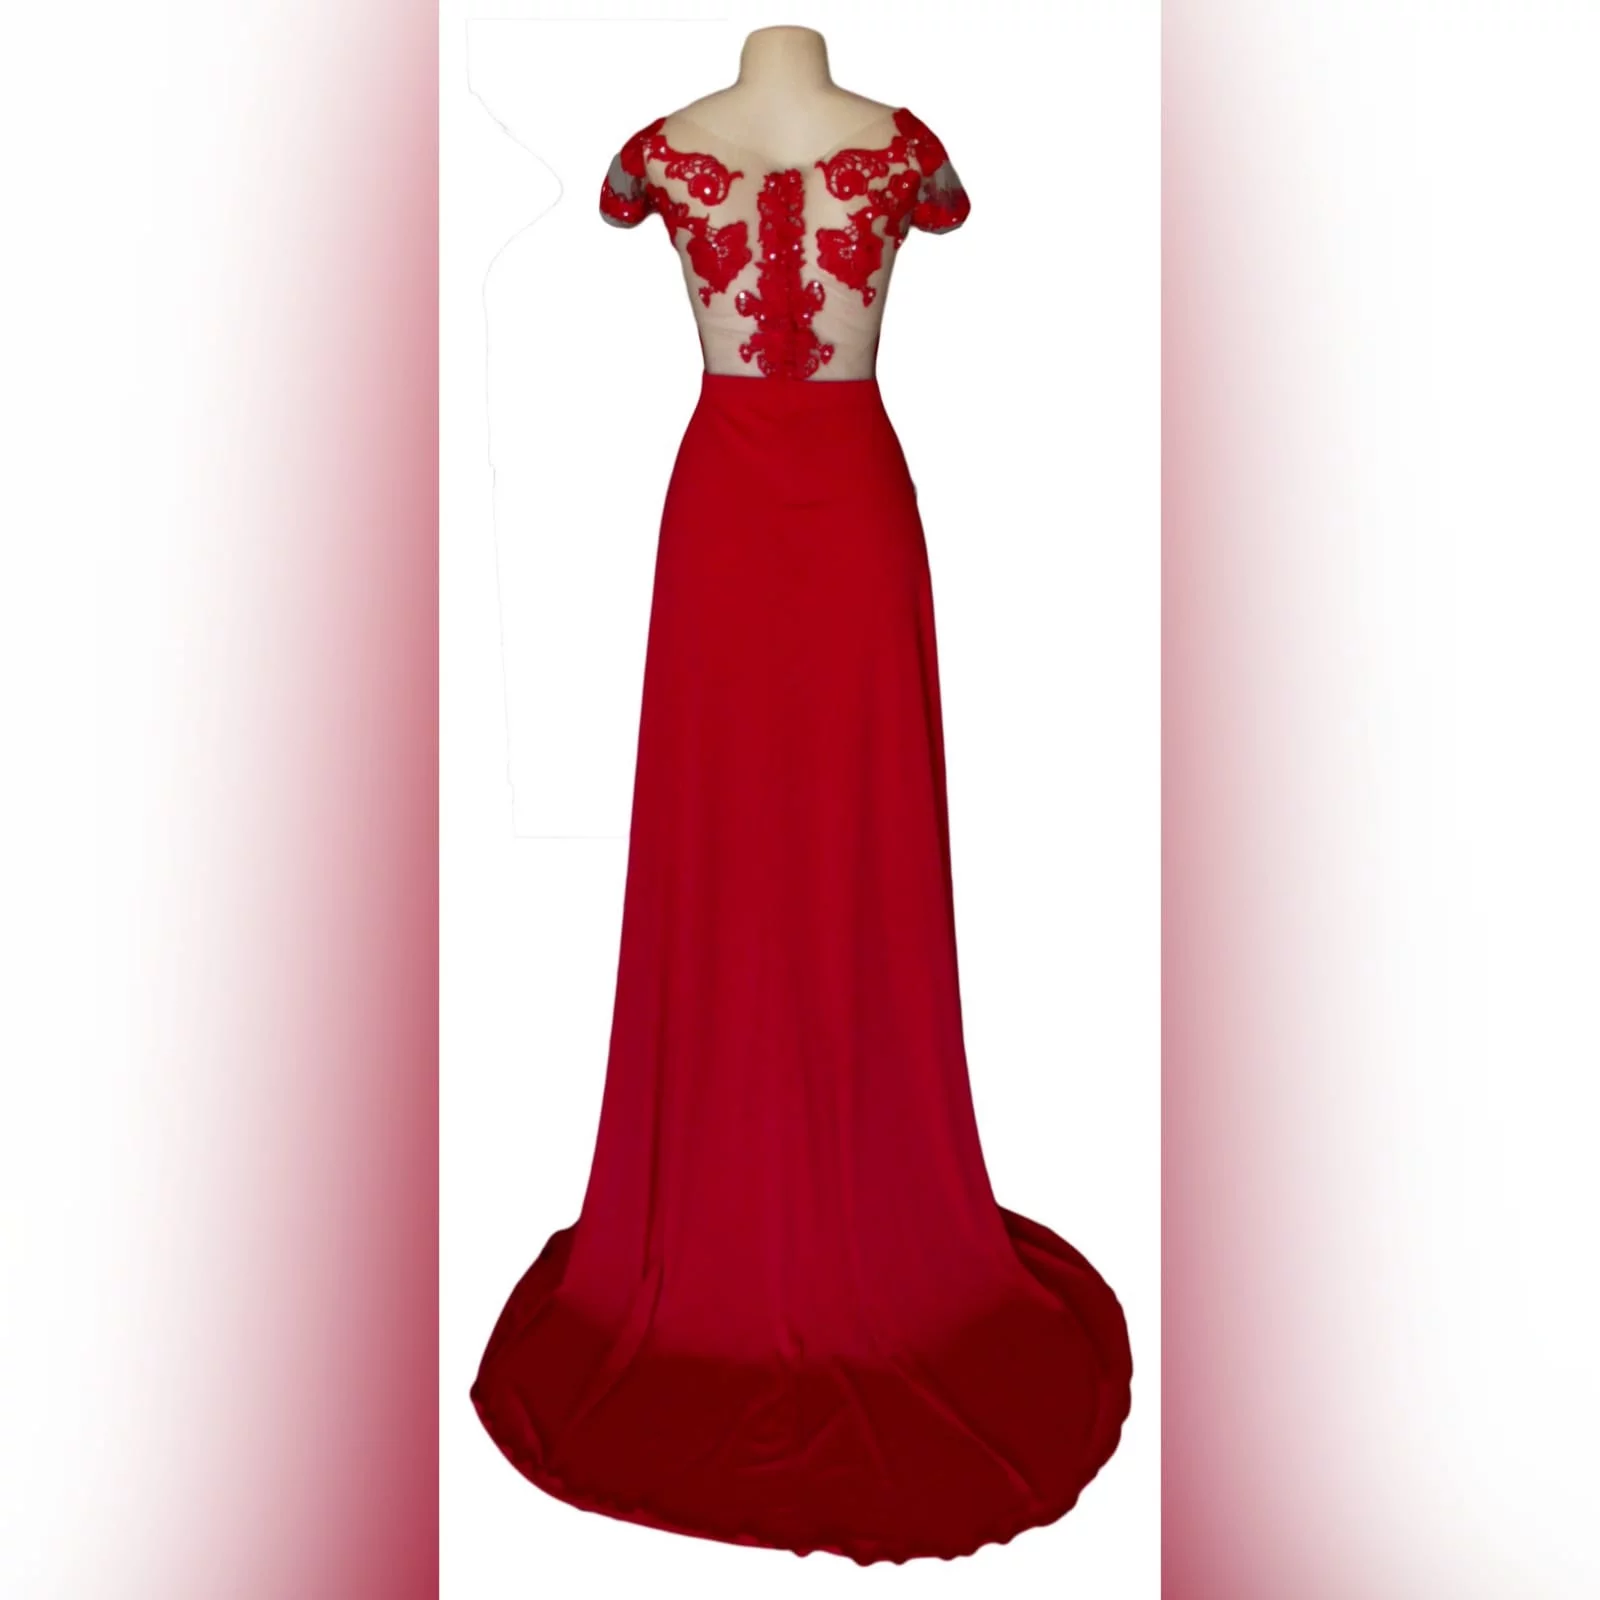 Red flowy lace bodice prom dress 3 red flowy lace bodice prom dress. With an illusion lace bodice detailed with silver beads and buttons. Evening dress with a slit and a train.